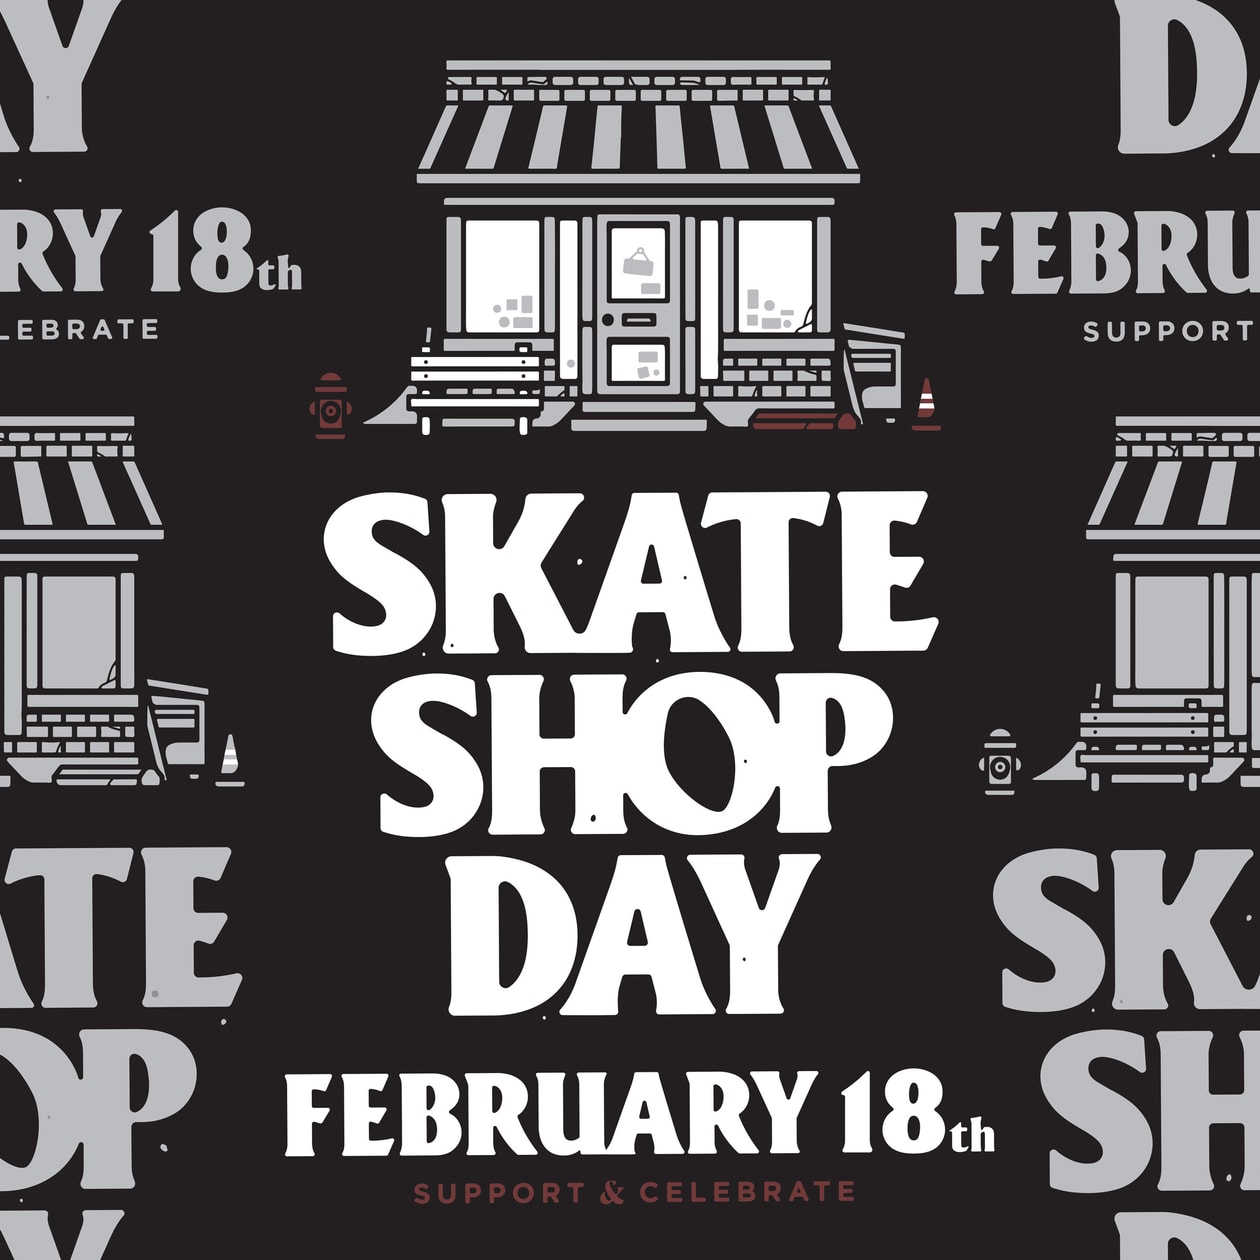 The 4th Annual Skate Shop Day is February 18th